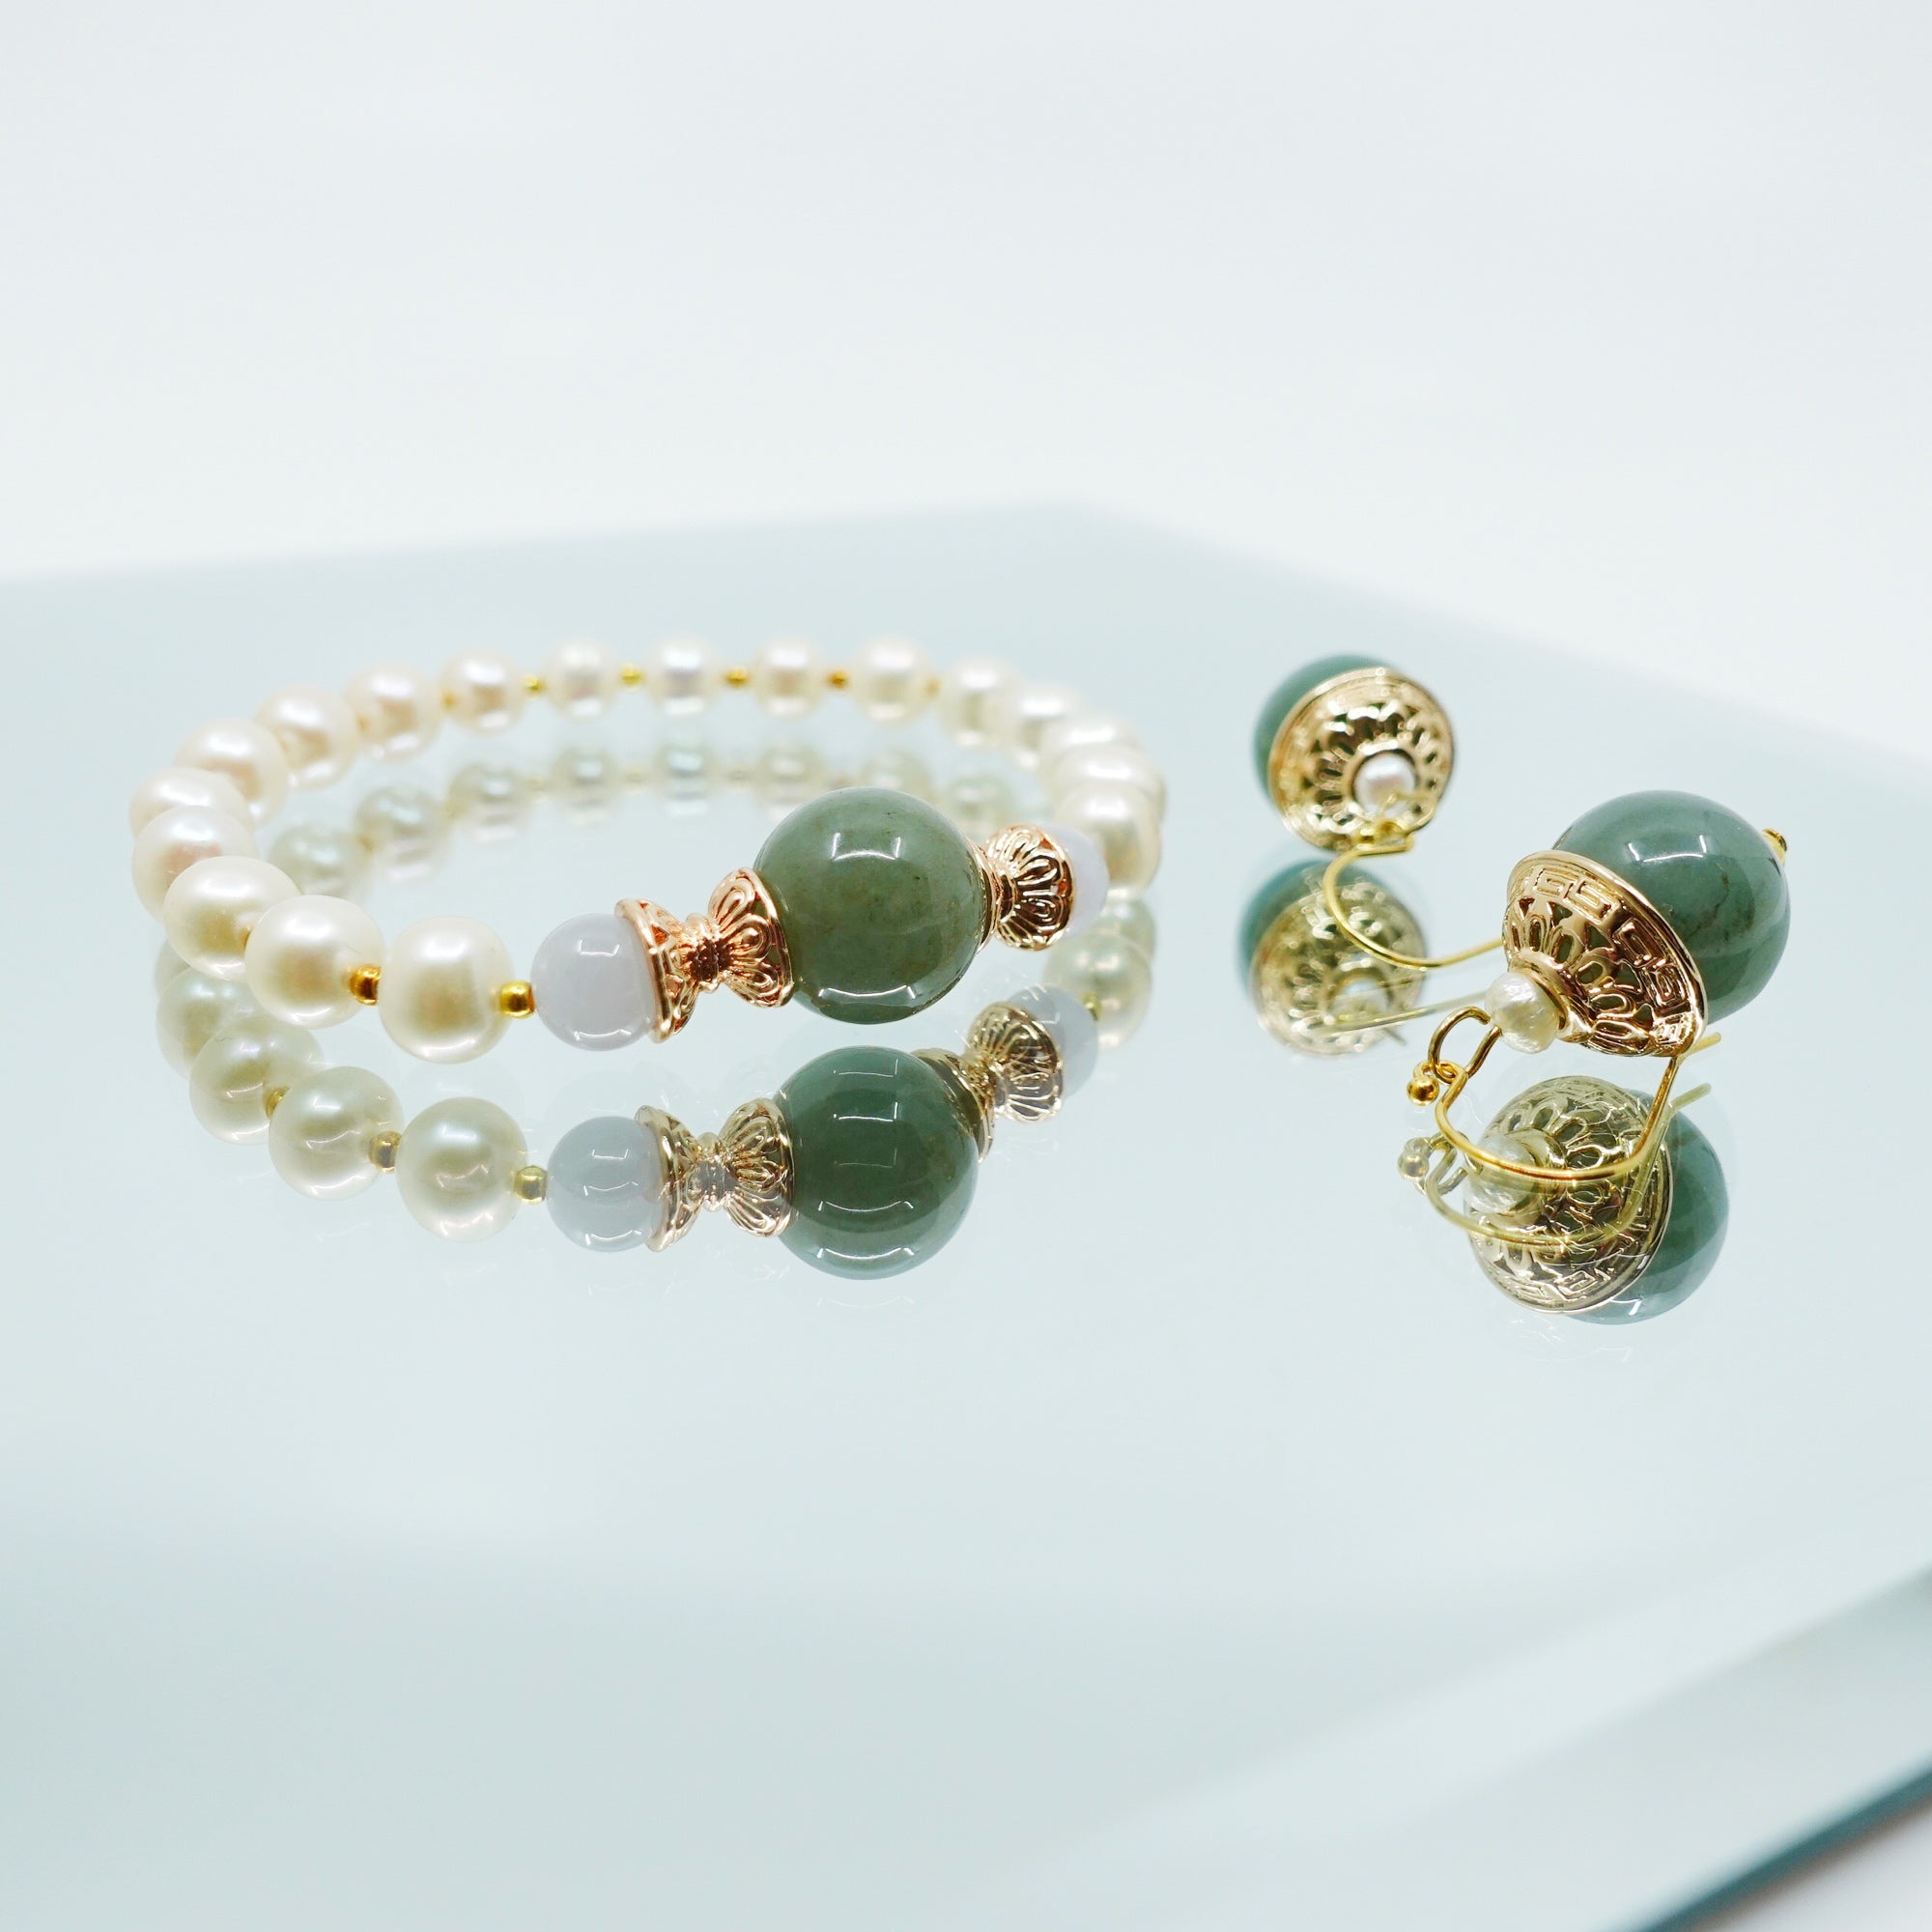 5 Rarest and Most Expensive Jade and Diamond Bracelets | The Loupe